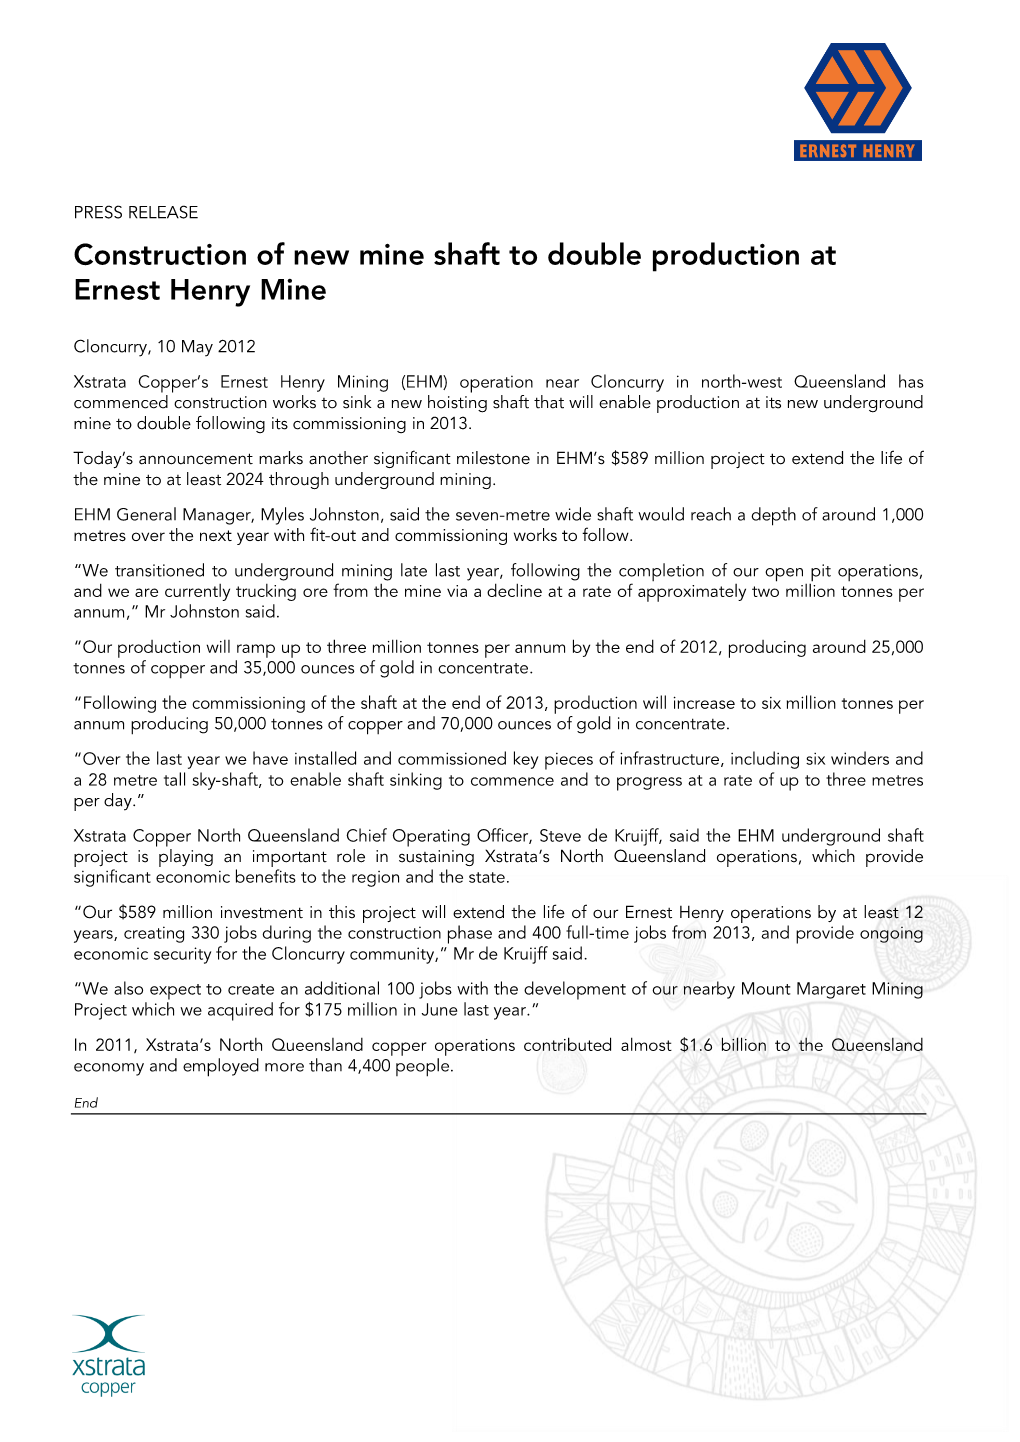 Construction of New Mine Shaft to Double Production at Ernest Henry Mine